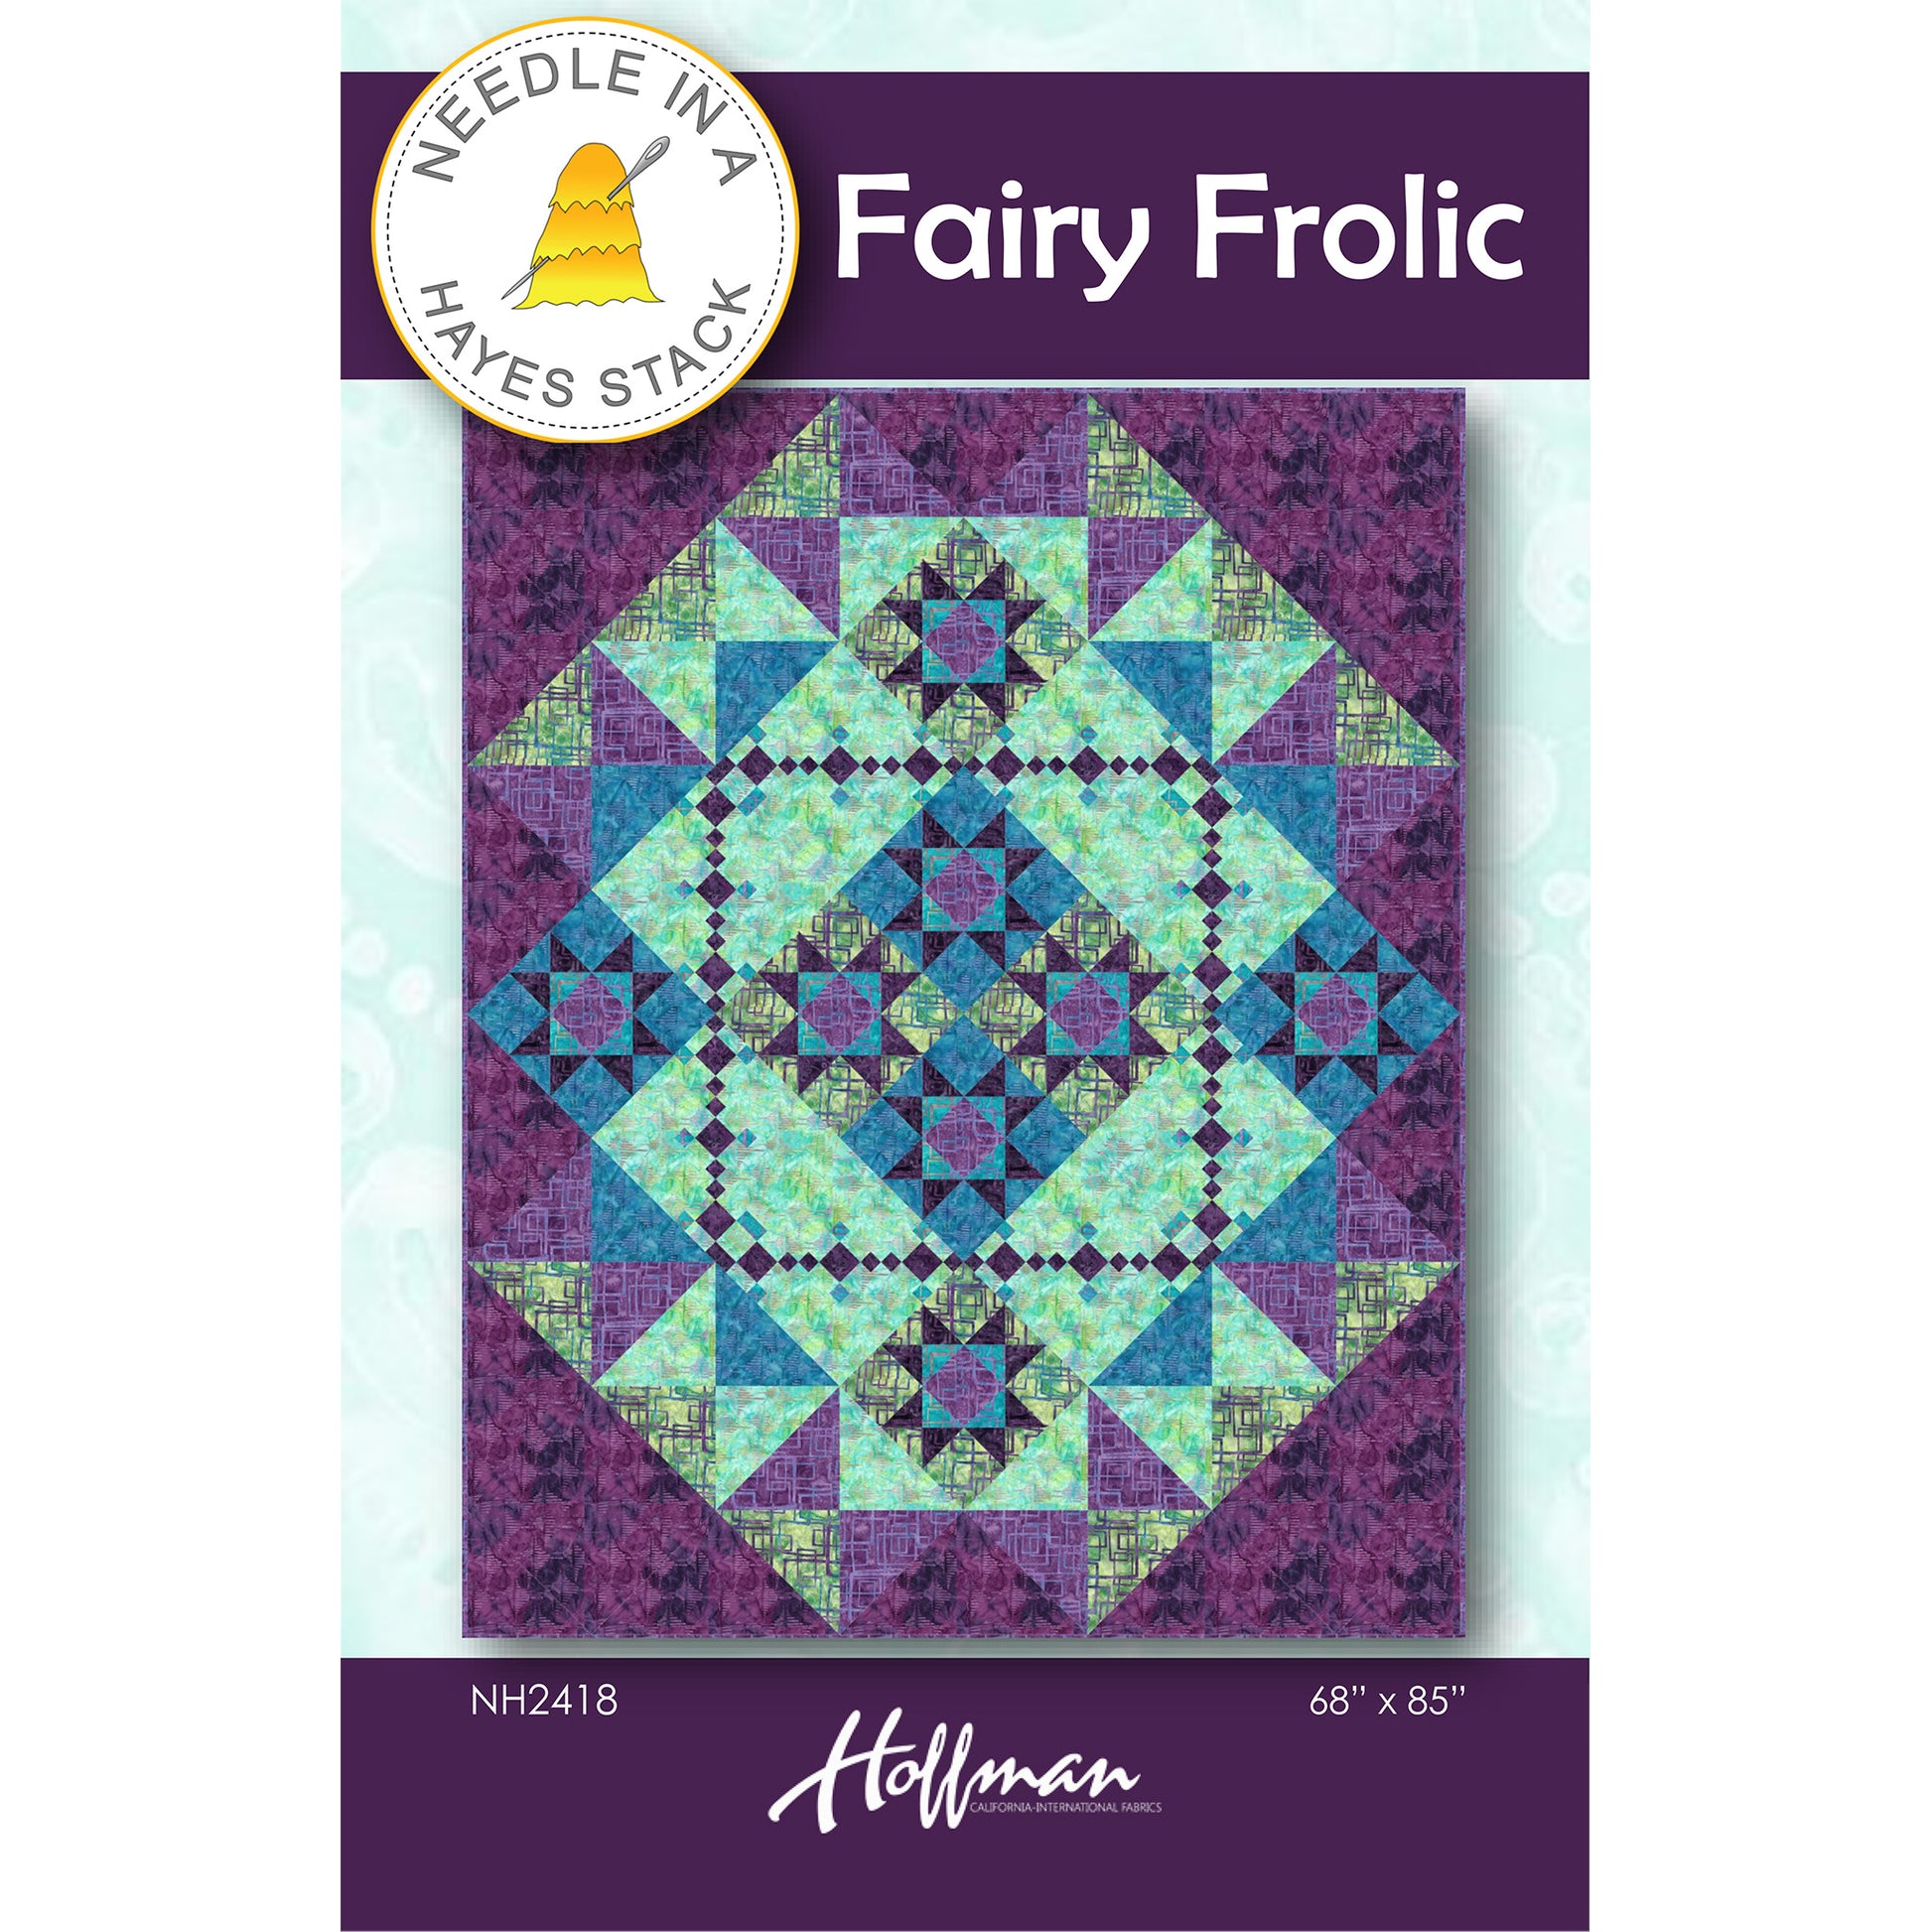 Cover image of pattern for Fairy Frolic quilt.